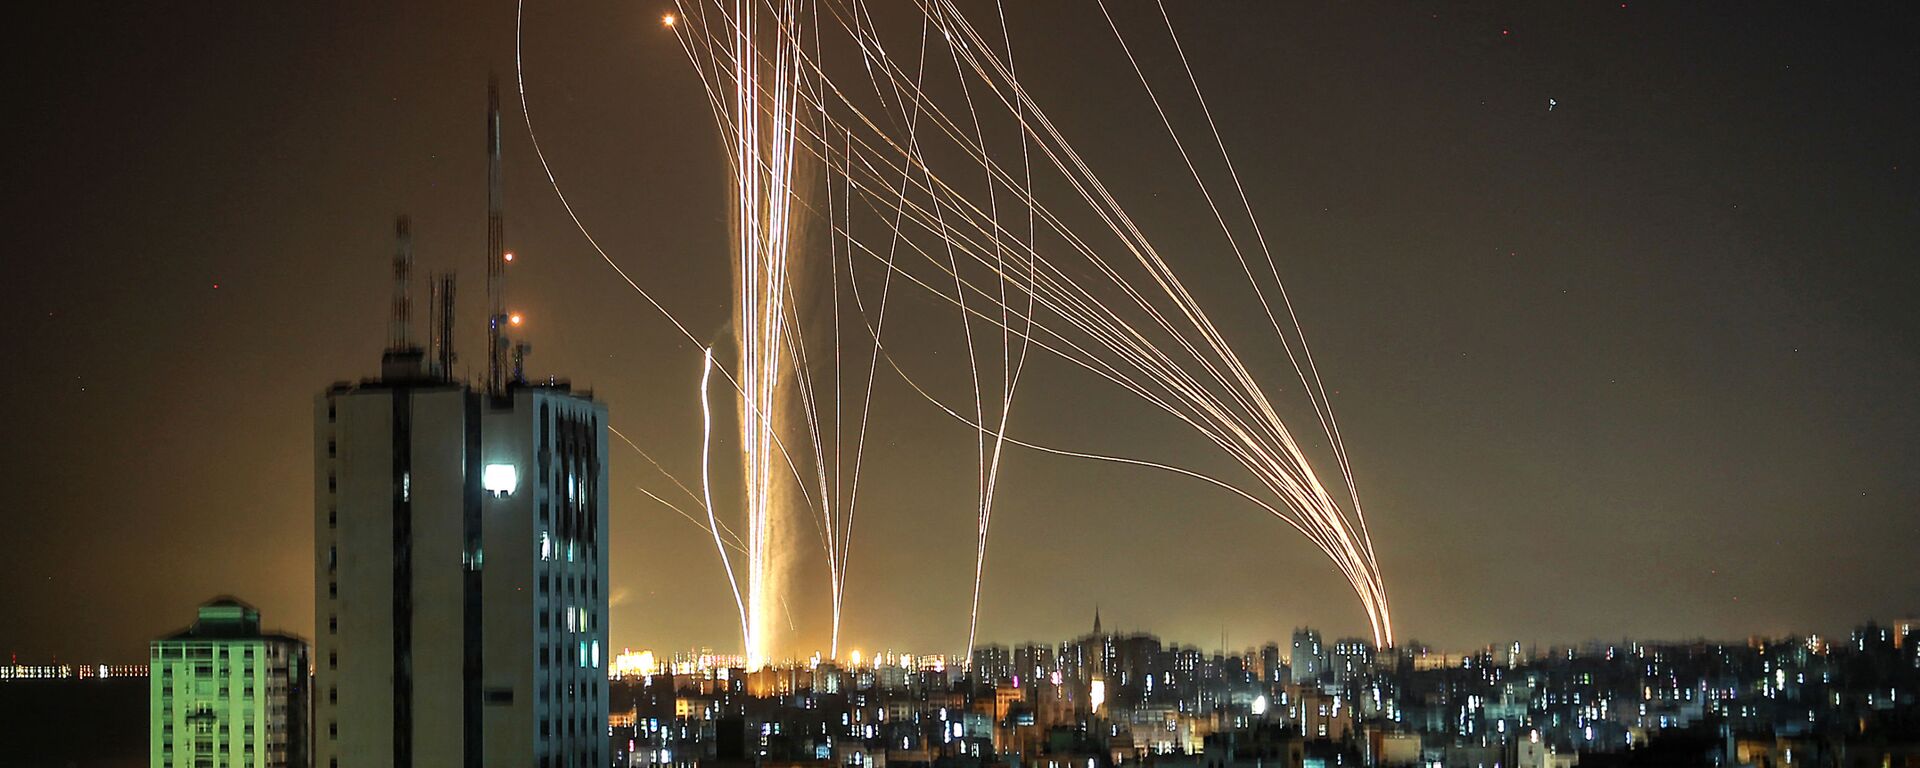 Rockets are launched from Gaza city, controlled by the Palestinian Hamas movement, in response to an Israeli air strike on a 12-storey building in the city, towards the coastal city of Tel Aviv, on 11 May 2021. - Sputnik International, 1920, 18.05.2021